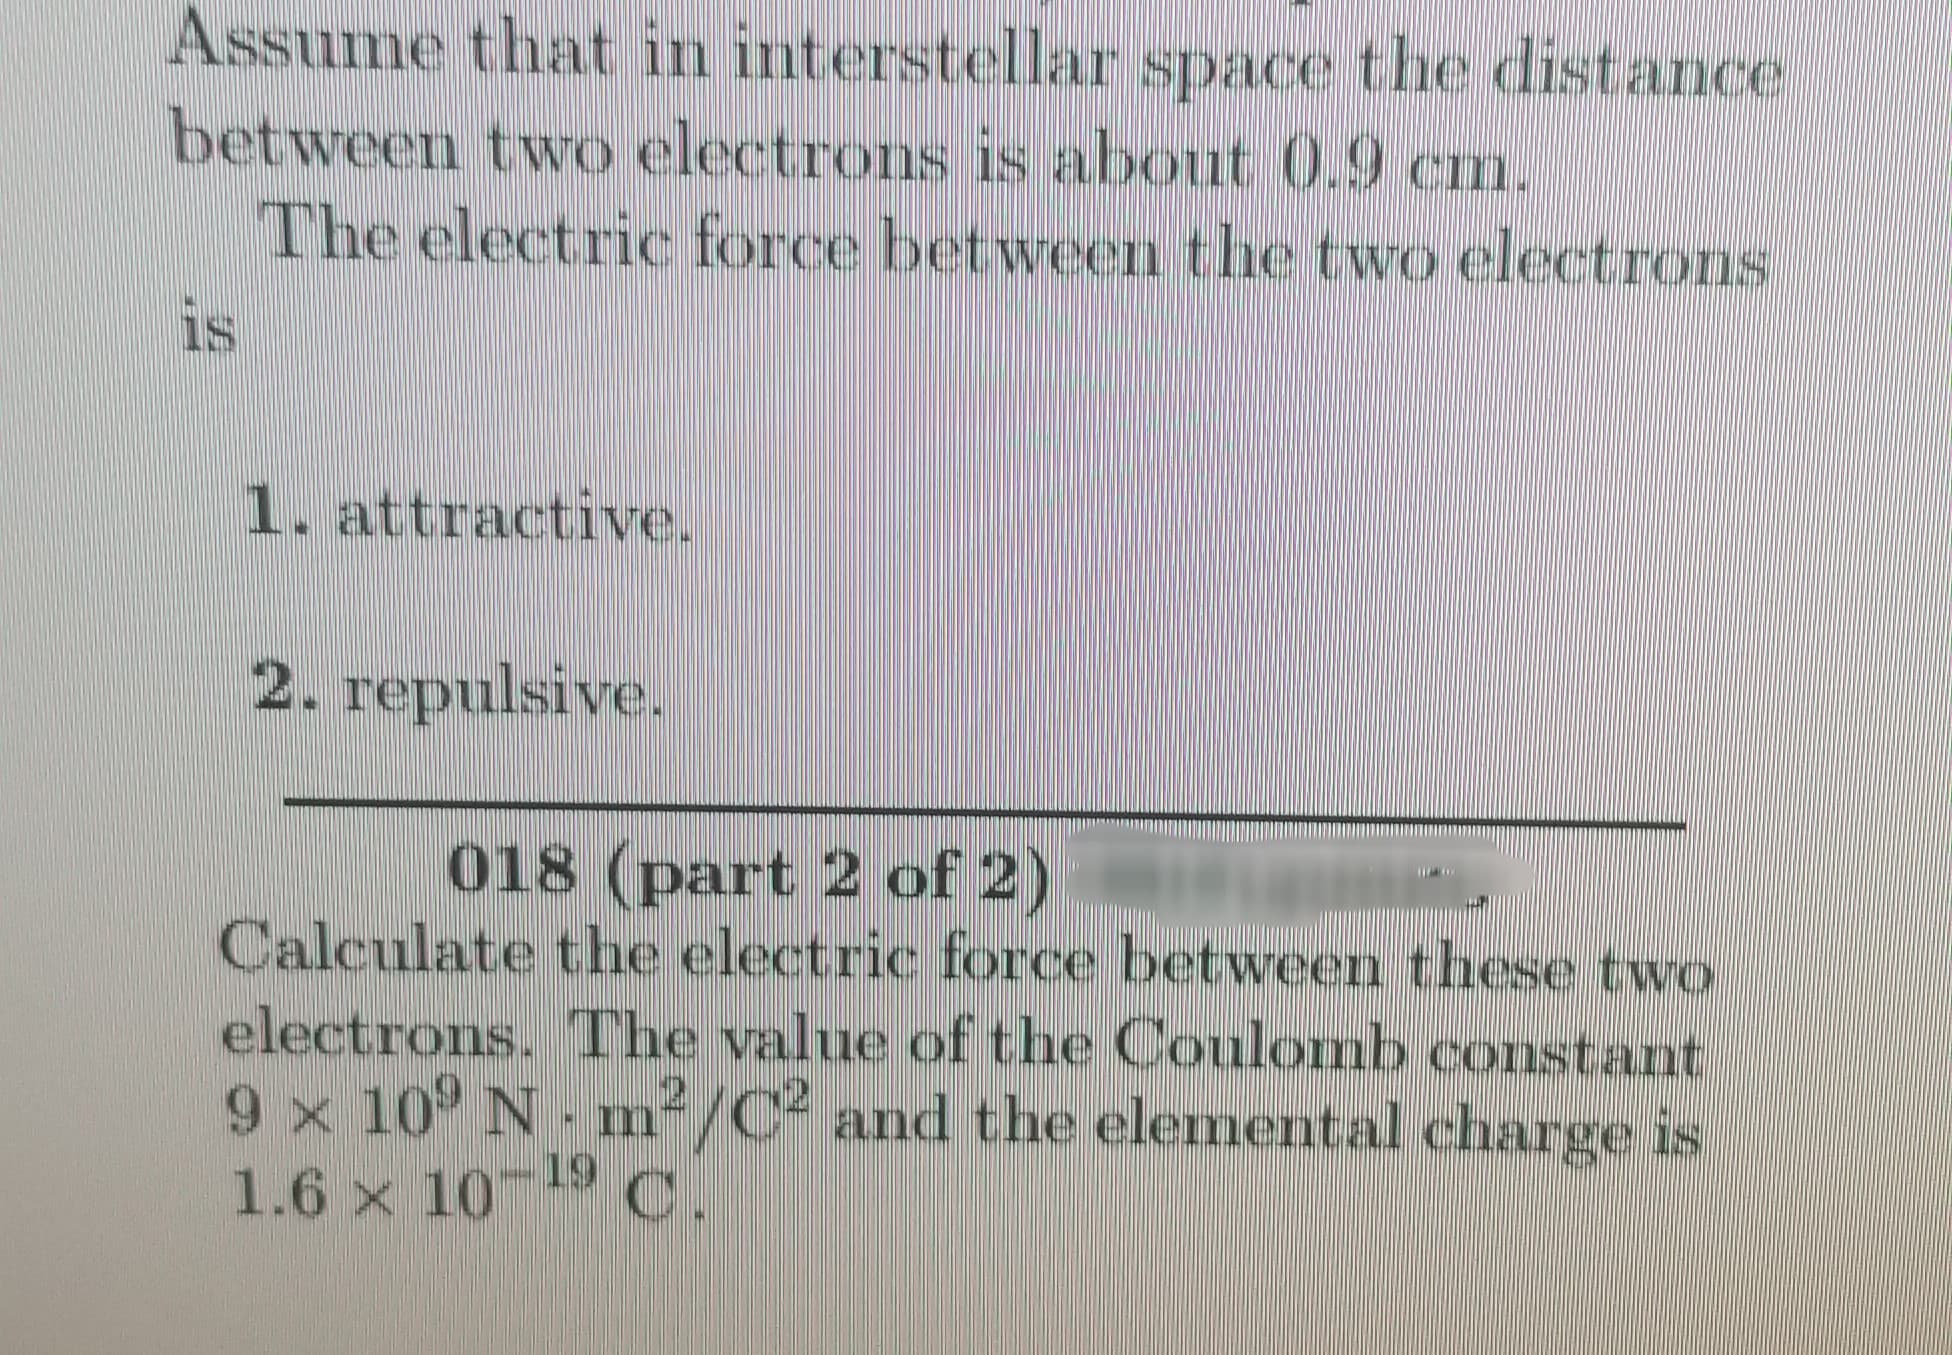 Assume that in interstellar space the distance
between two electrons is about 0.9 cm.
The electric force between the two electrons
is
1. attractive.
2. repulsive.
018 (part 2 of 2)
Calculate the electric force between these two
electrons. The value of the Coulomb constant
9 x 10° N m²/C² and the elemental charge is
1.6 x 10-19 C.
